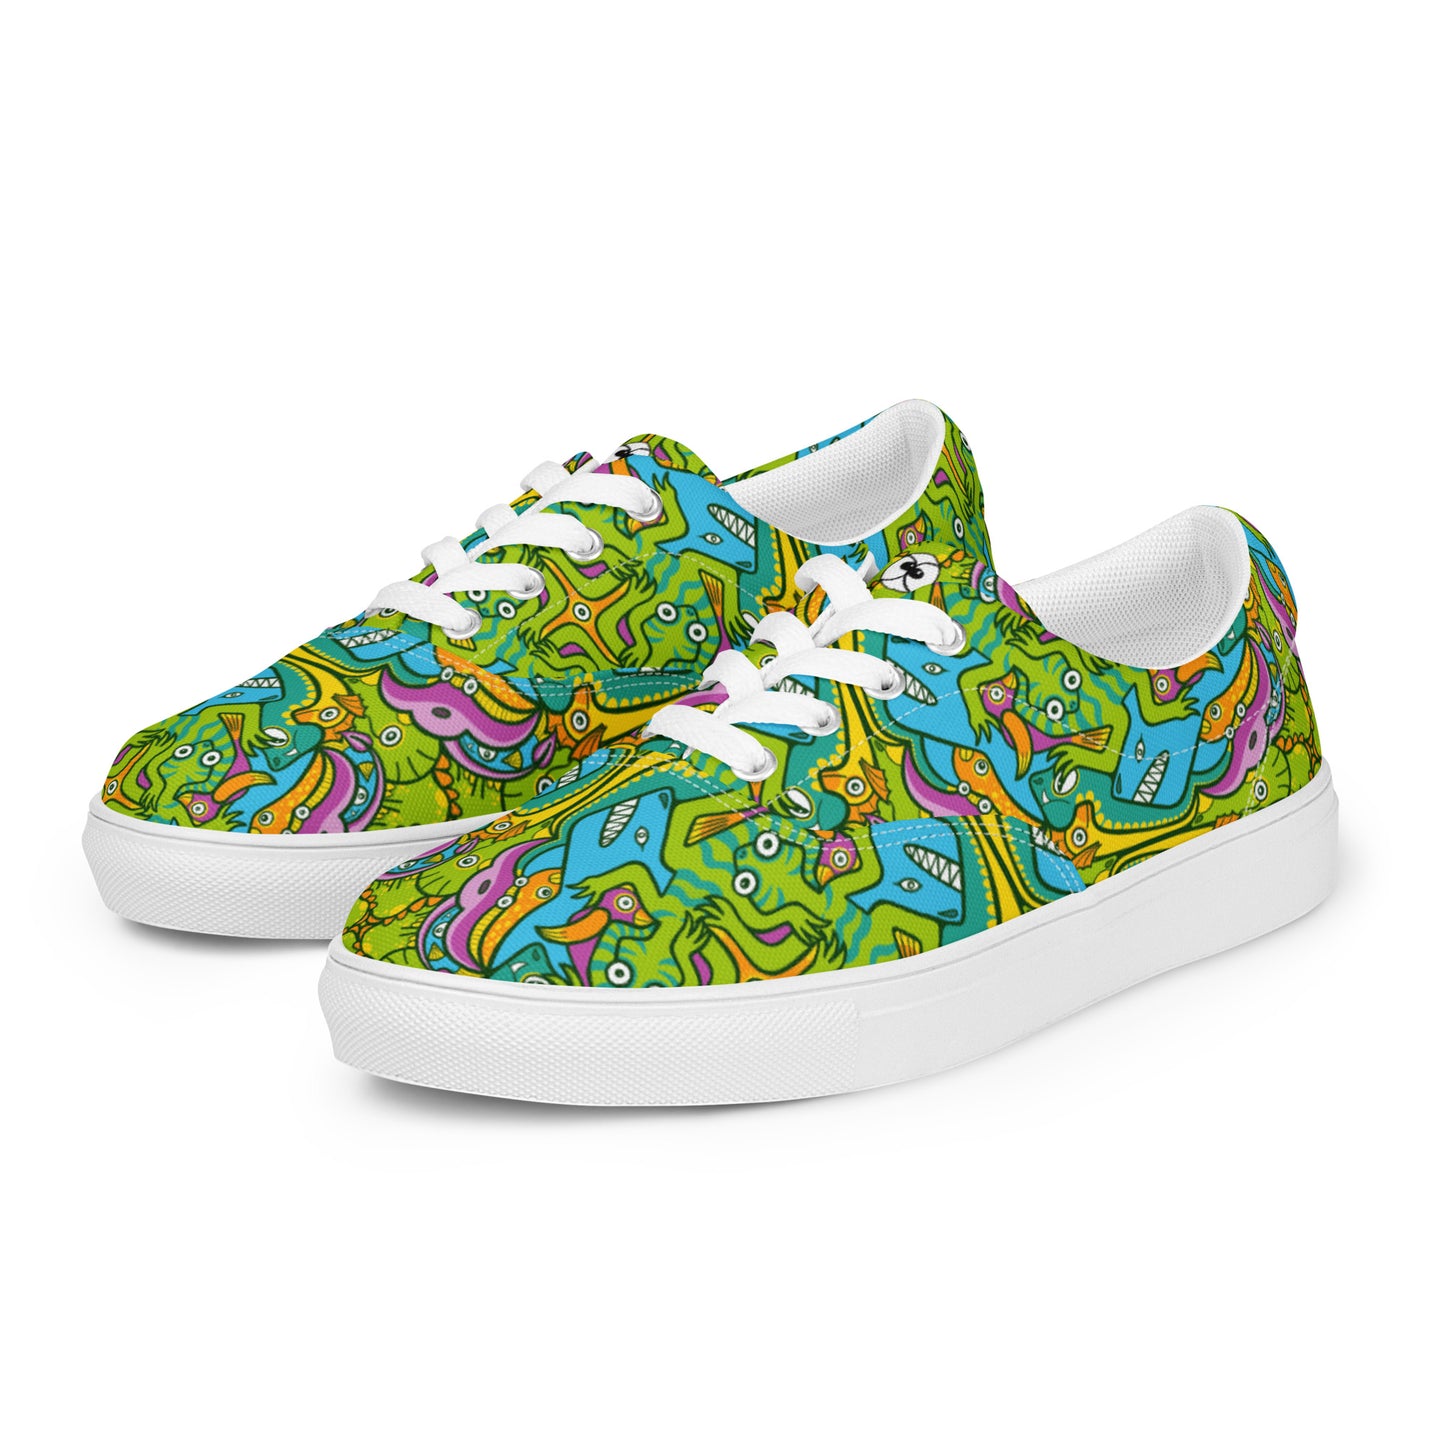 To keep calm and doodle is more than just doodling Men’s lace-up canvas shoes. Overview